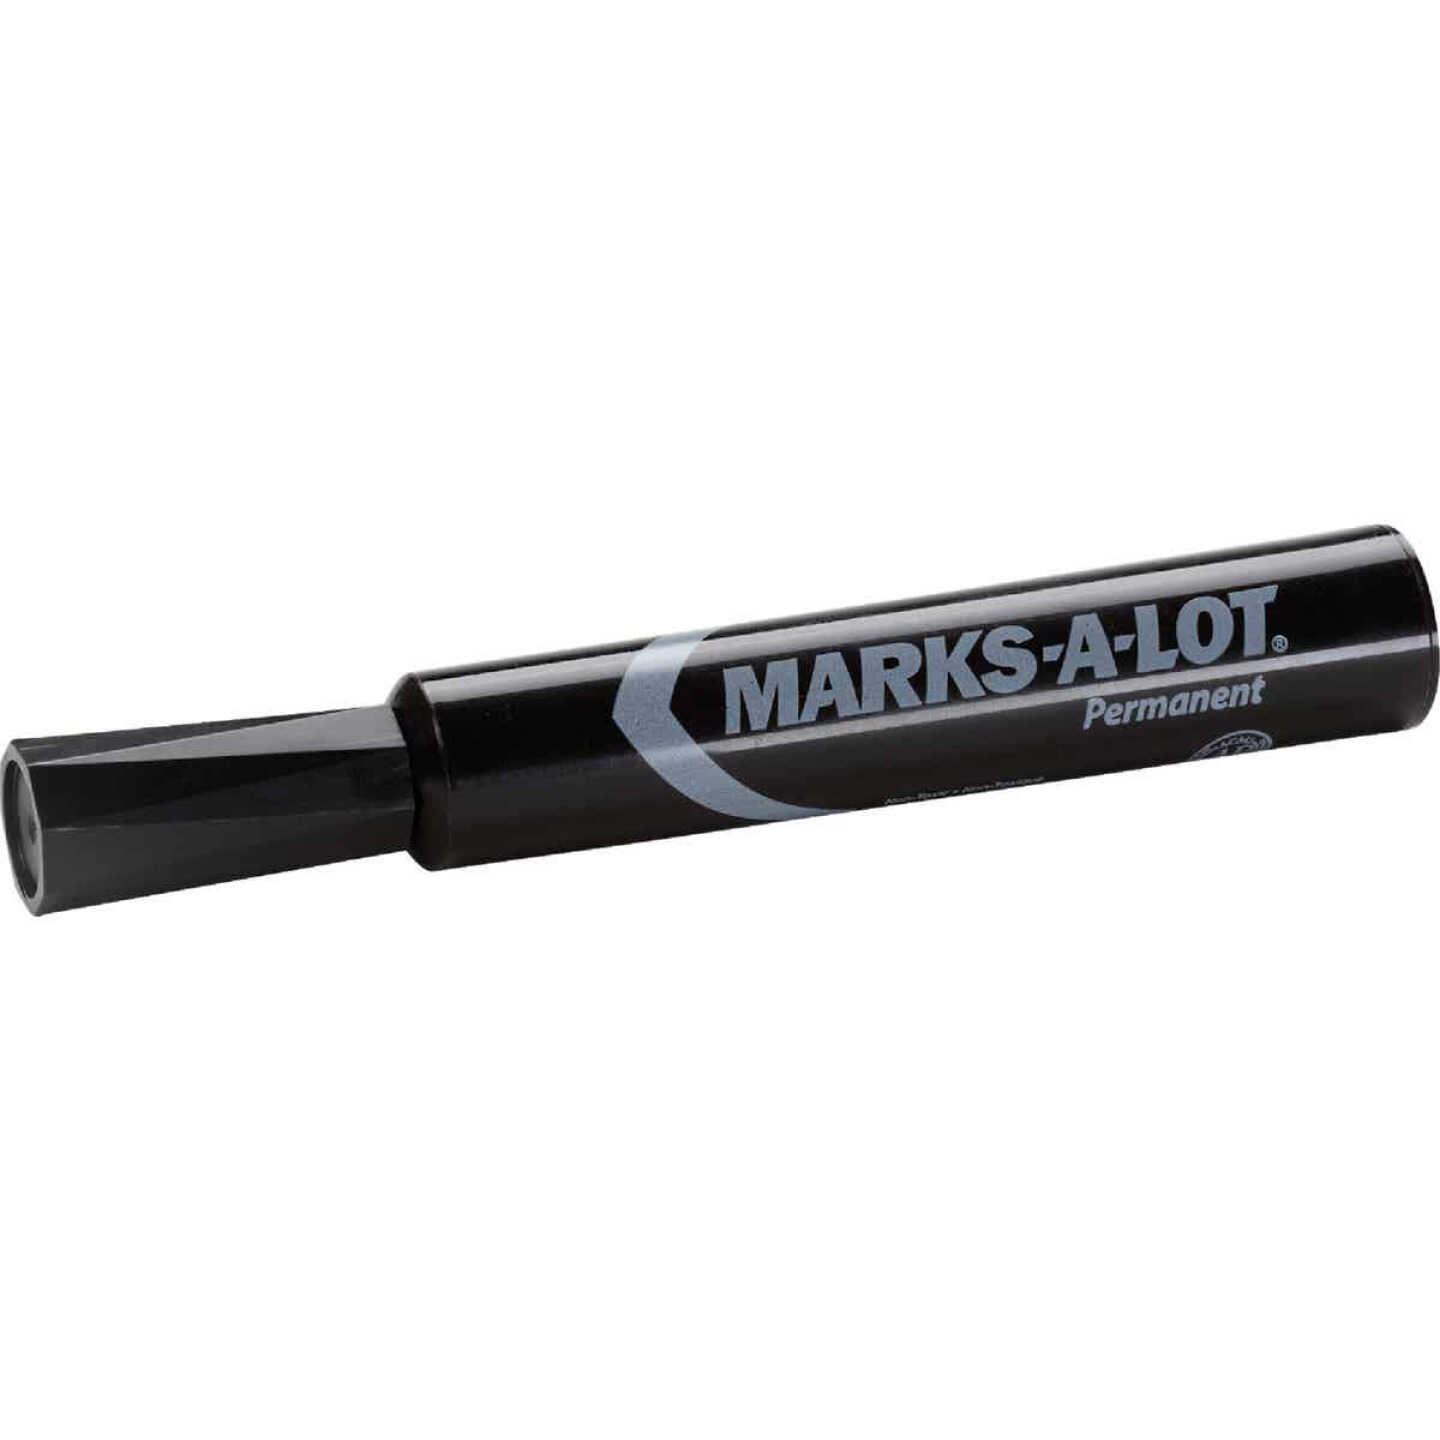  Marks-A-Lot Jumbo Chisel Tip Permanent Marker, Black, 12 Pack  (24148) : Marksalot Jumbo : Office Products